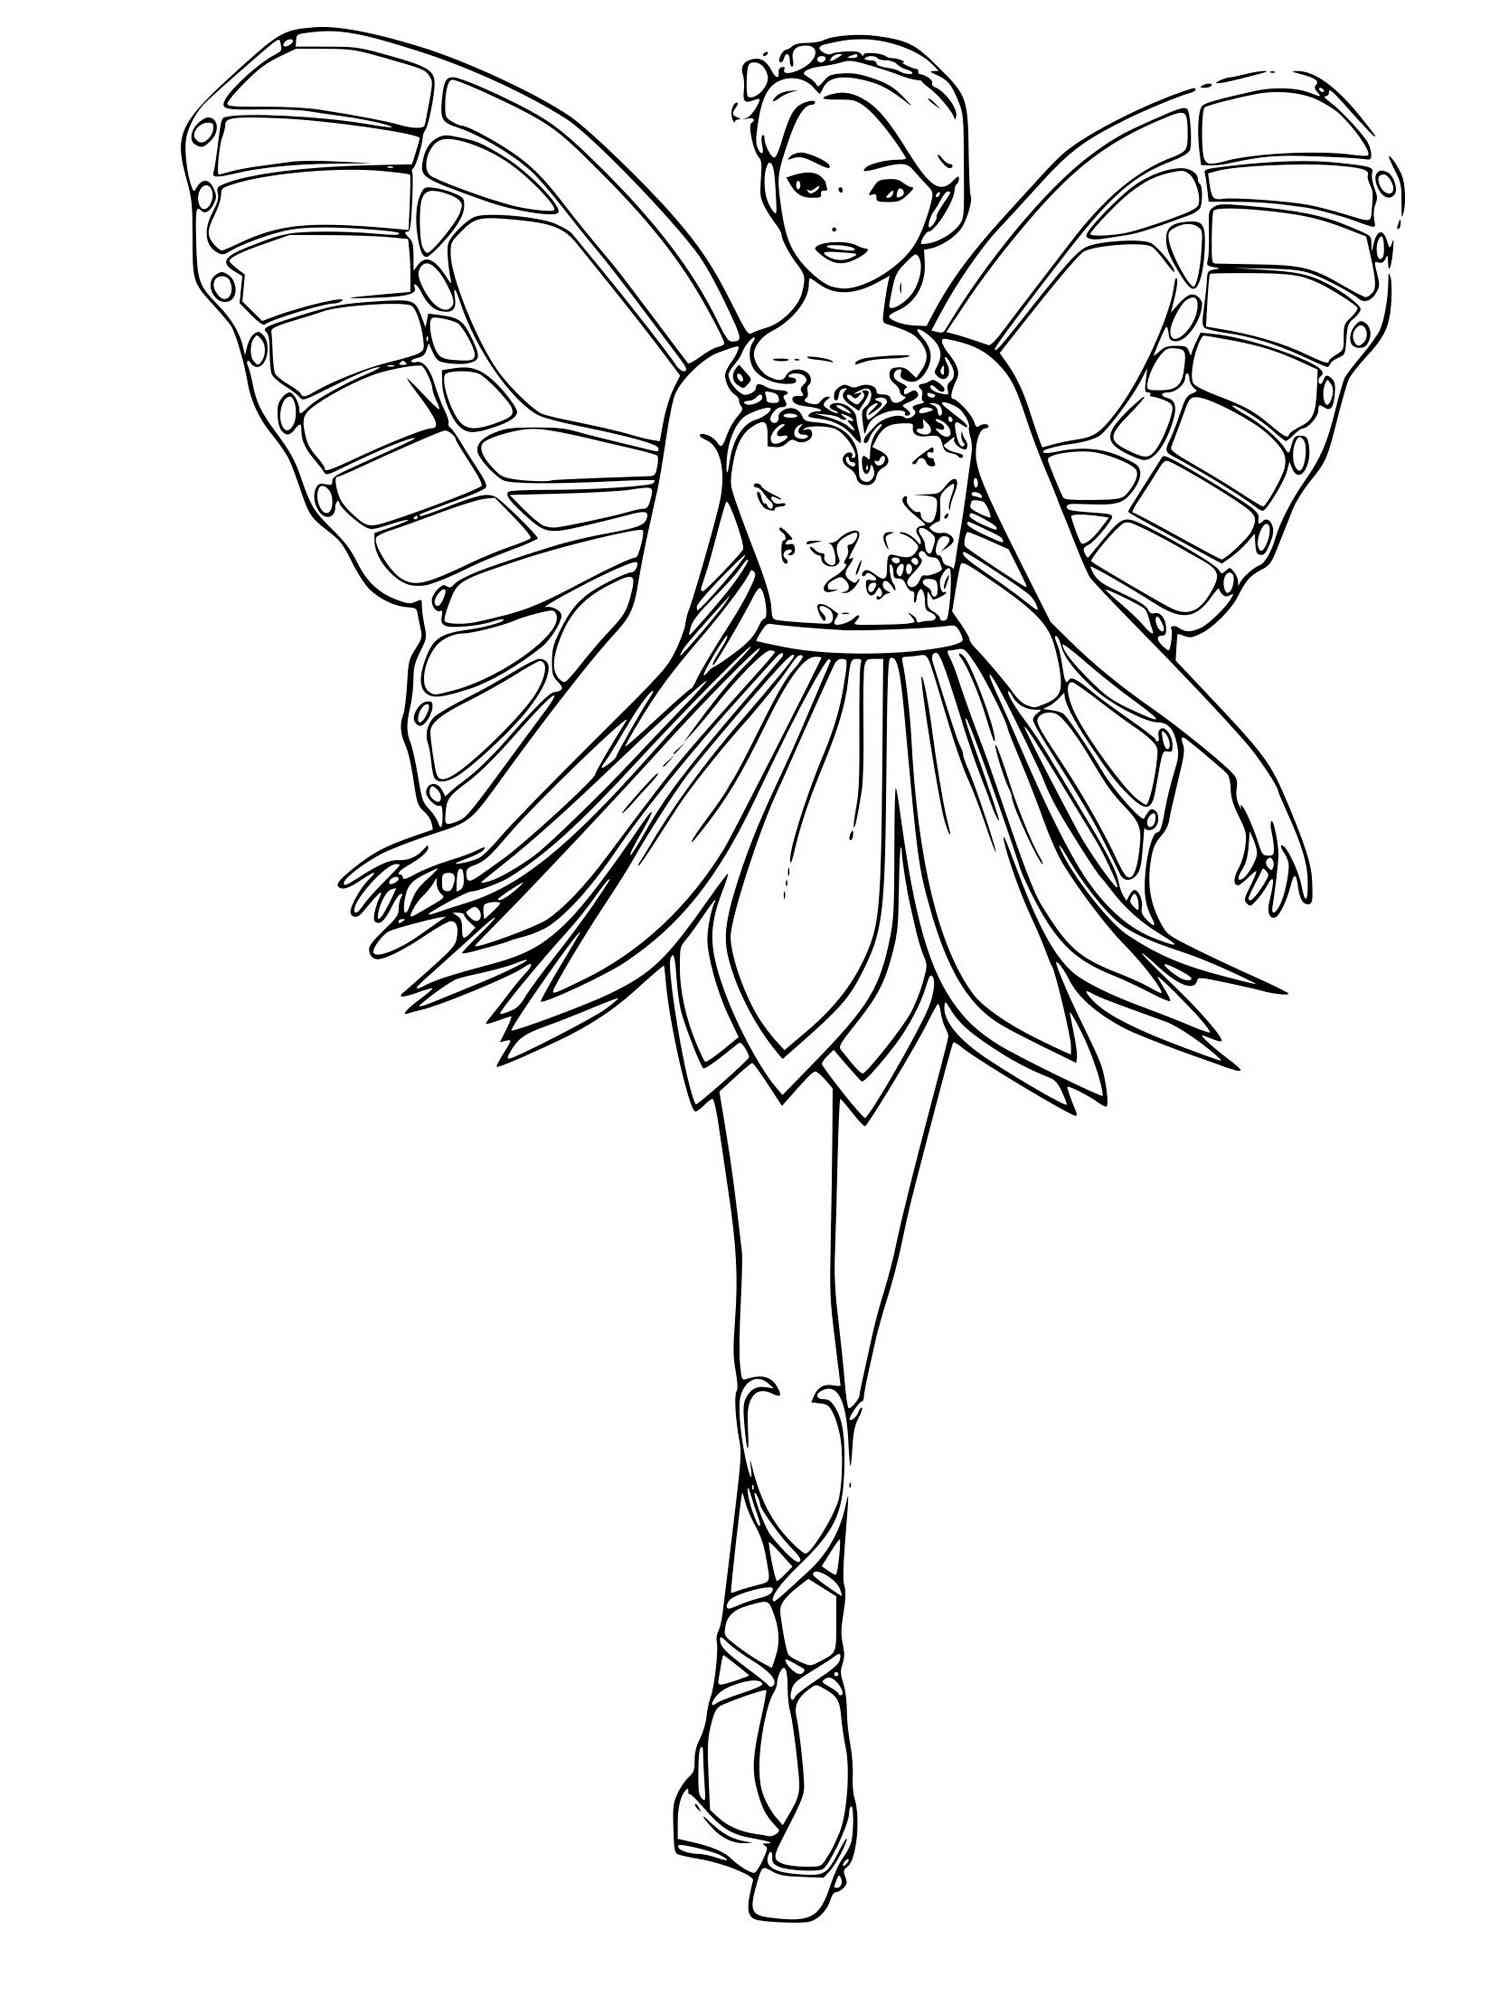 Barbie Fairy 1 coloring page